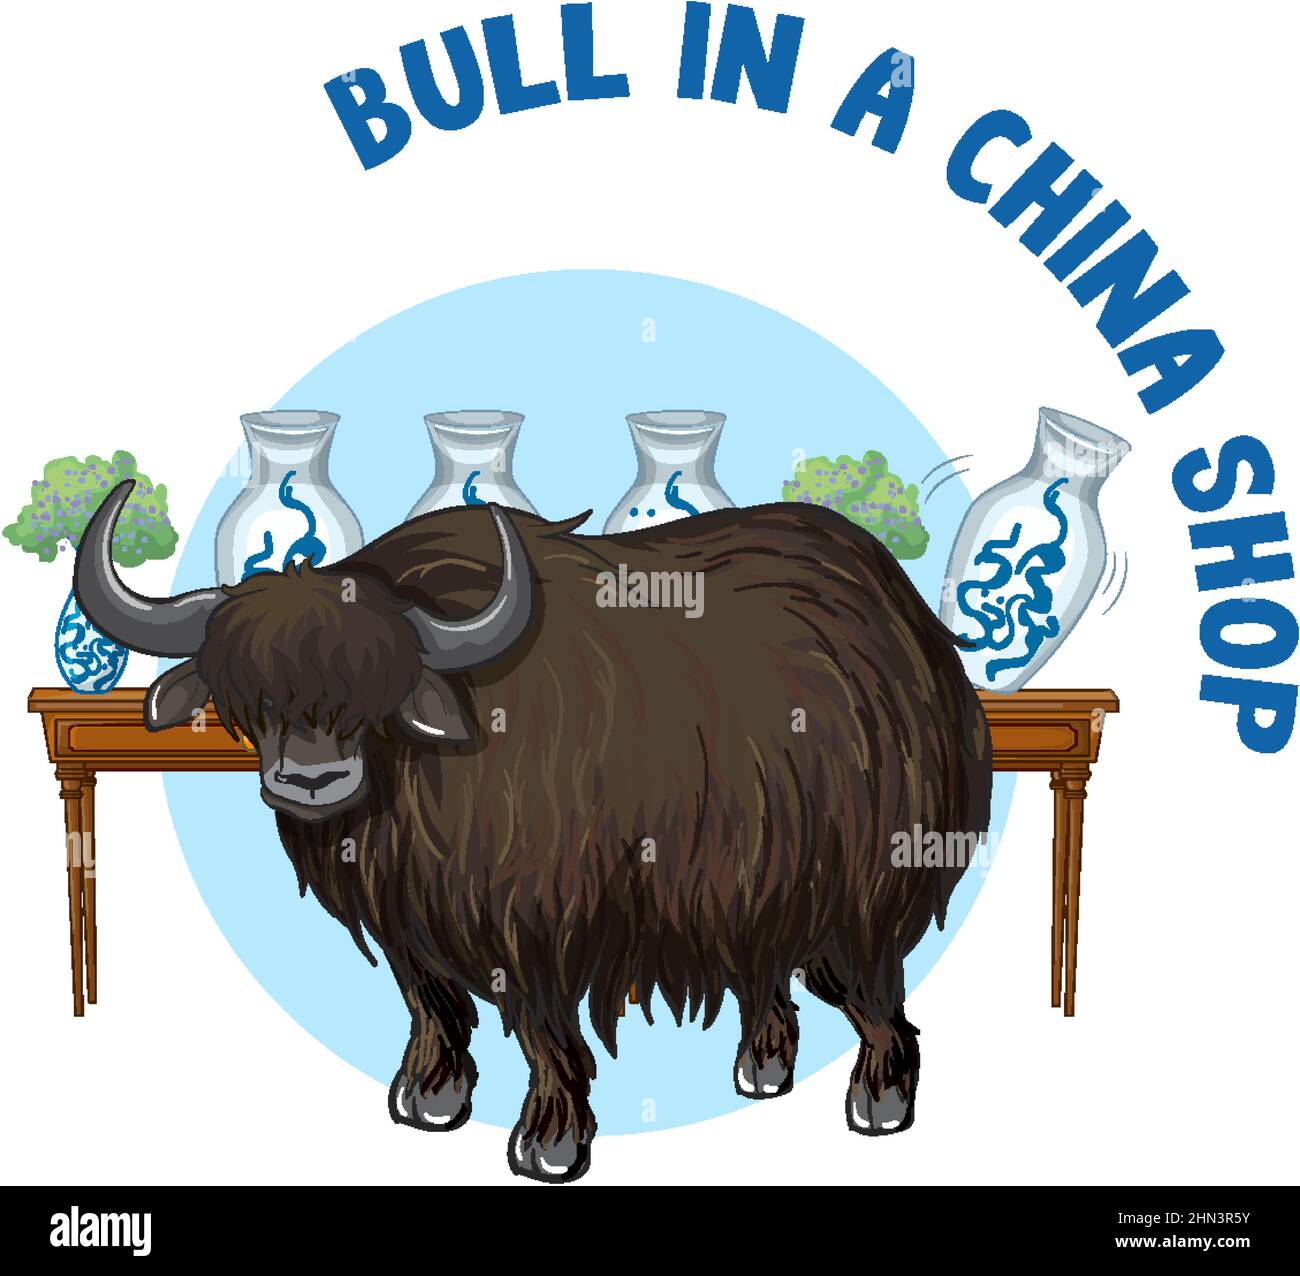 English idiom with bull in a china shop illustration Stock Vector